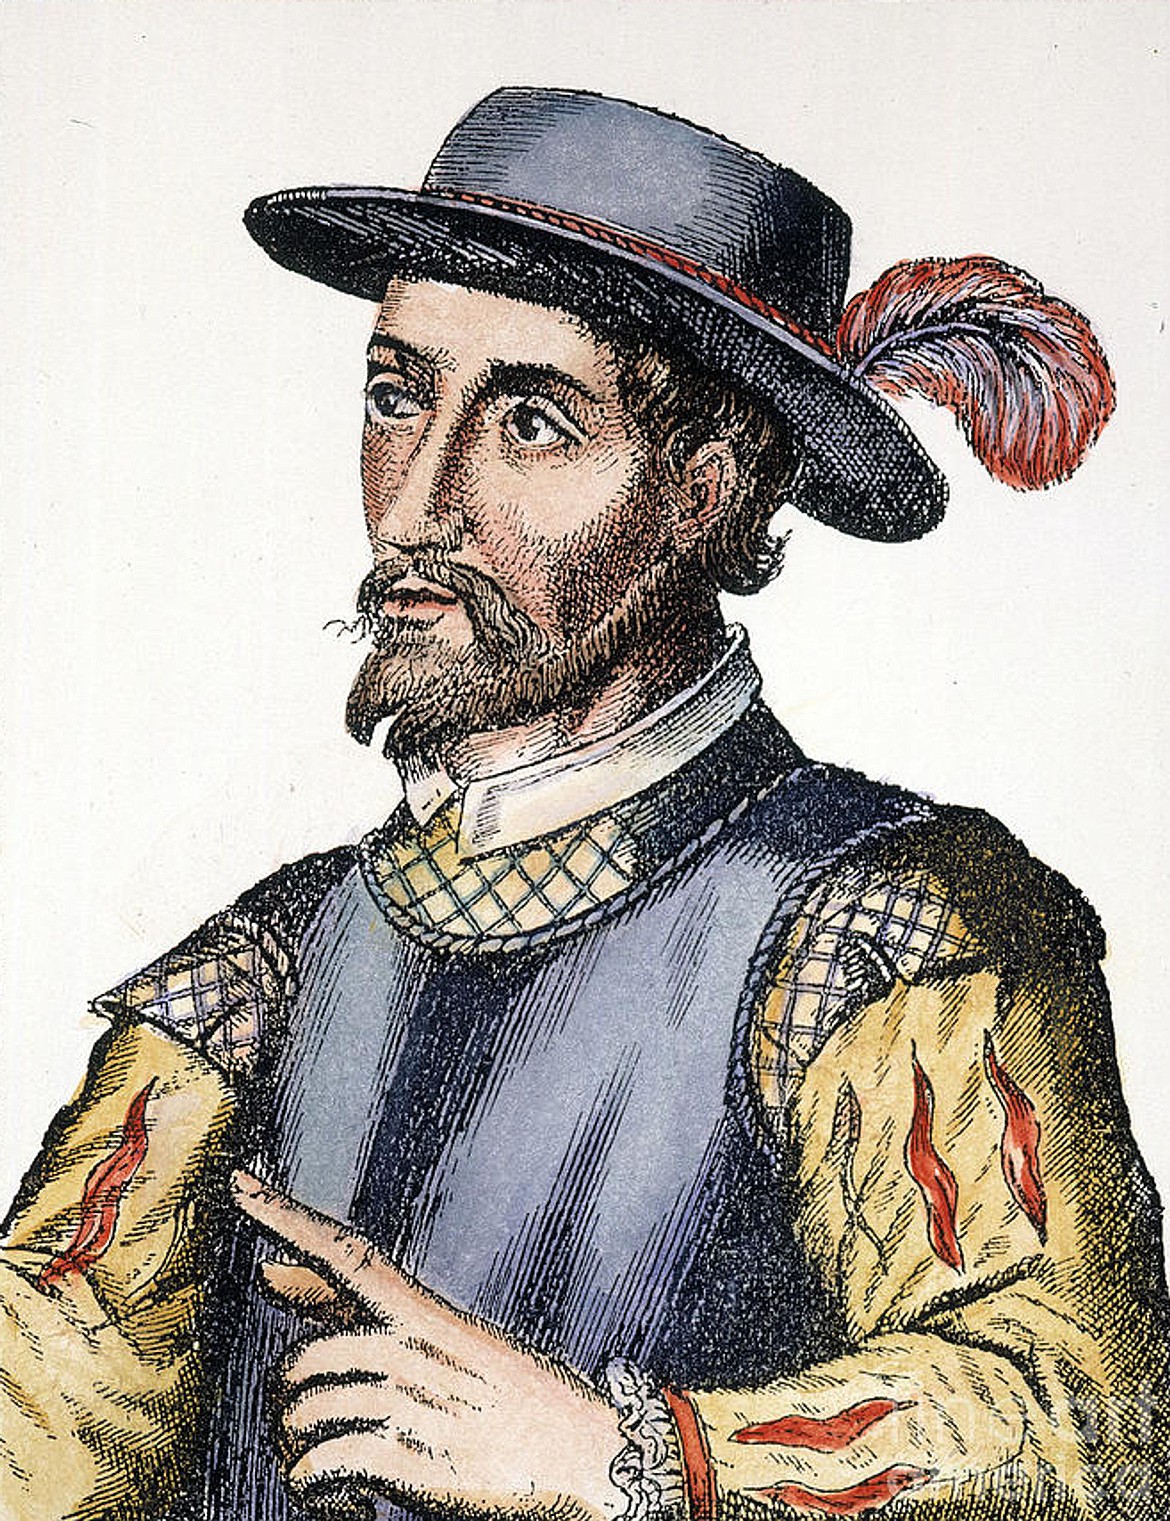 Spanish explorer Ponce de León was likely the first European to set foot on what is now the U.S. in 1513 — though the Vikings visited earlier — and established a settlement in 1521 that was short-lived because of hostile local Indians.